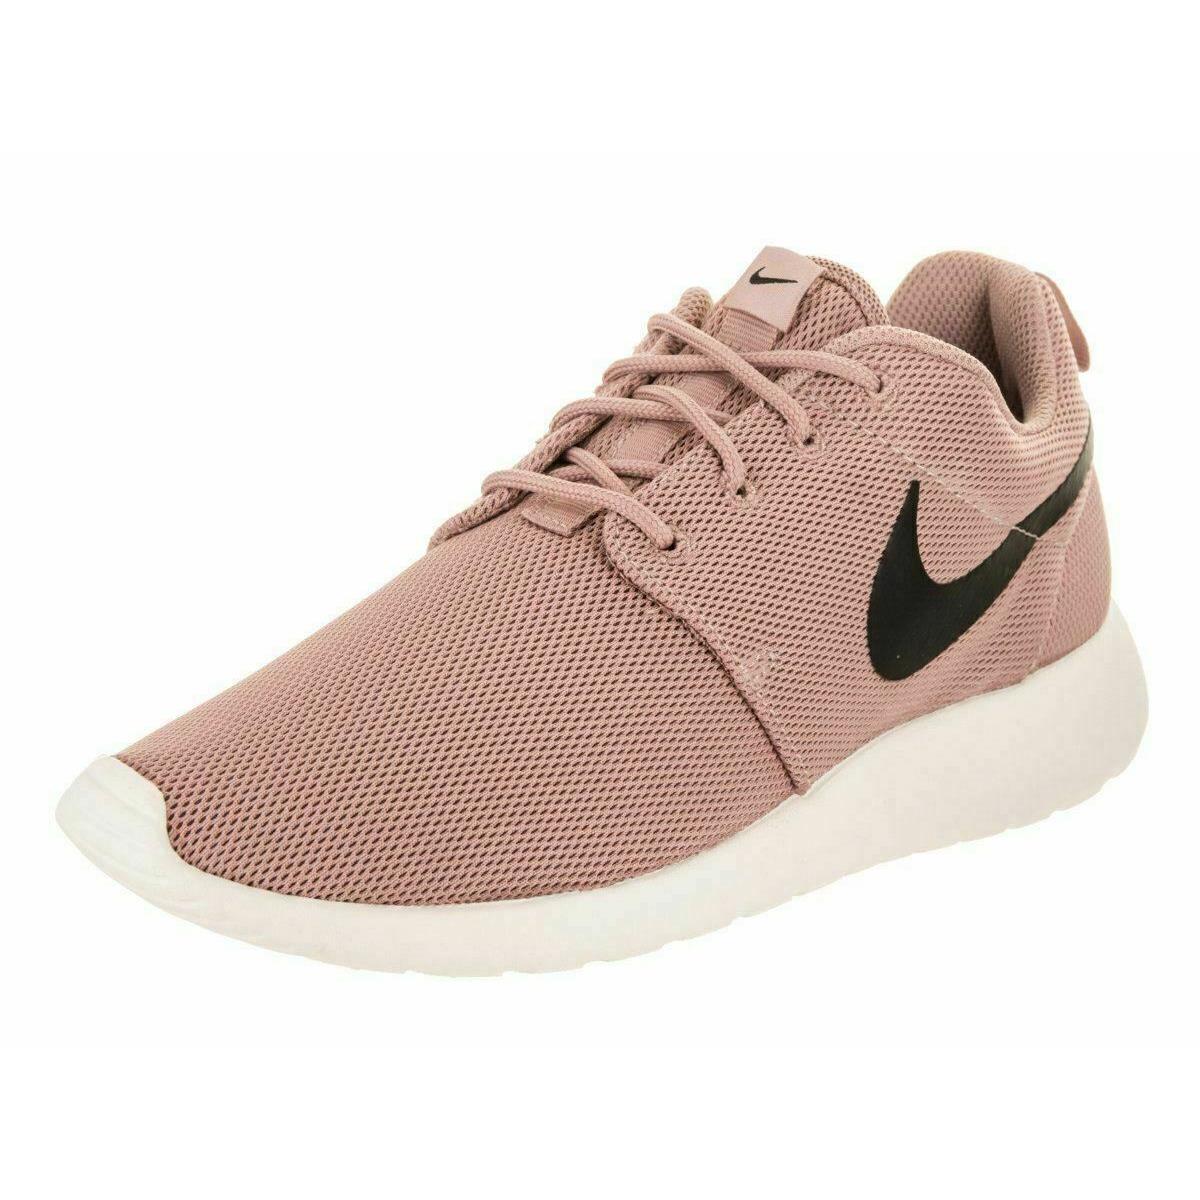 Nike shoes Roshe One - Brown & White 6